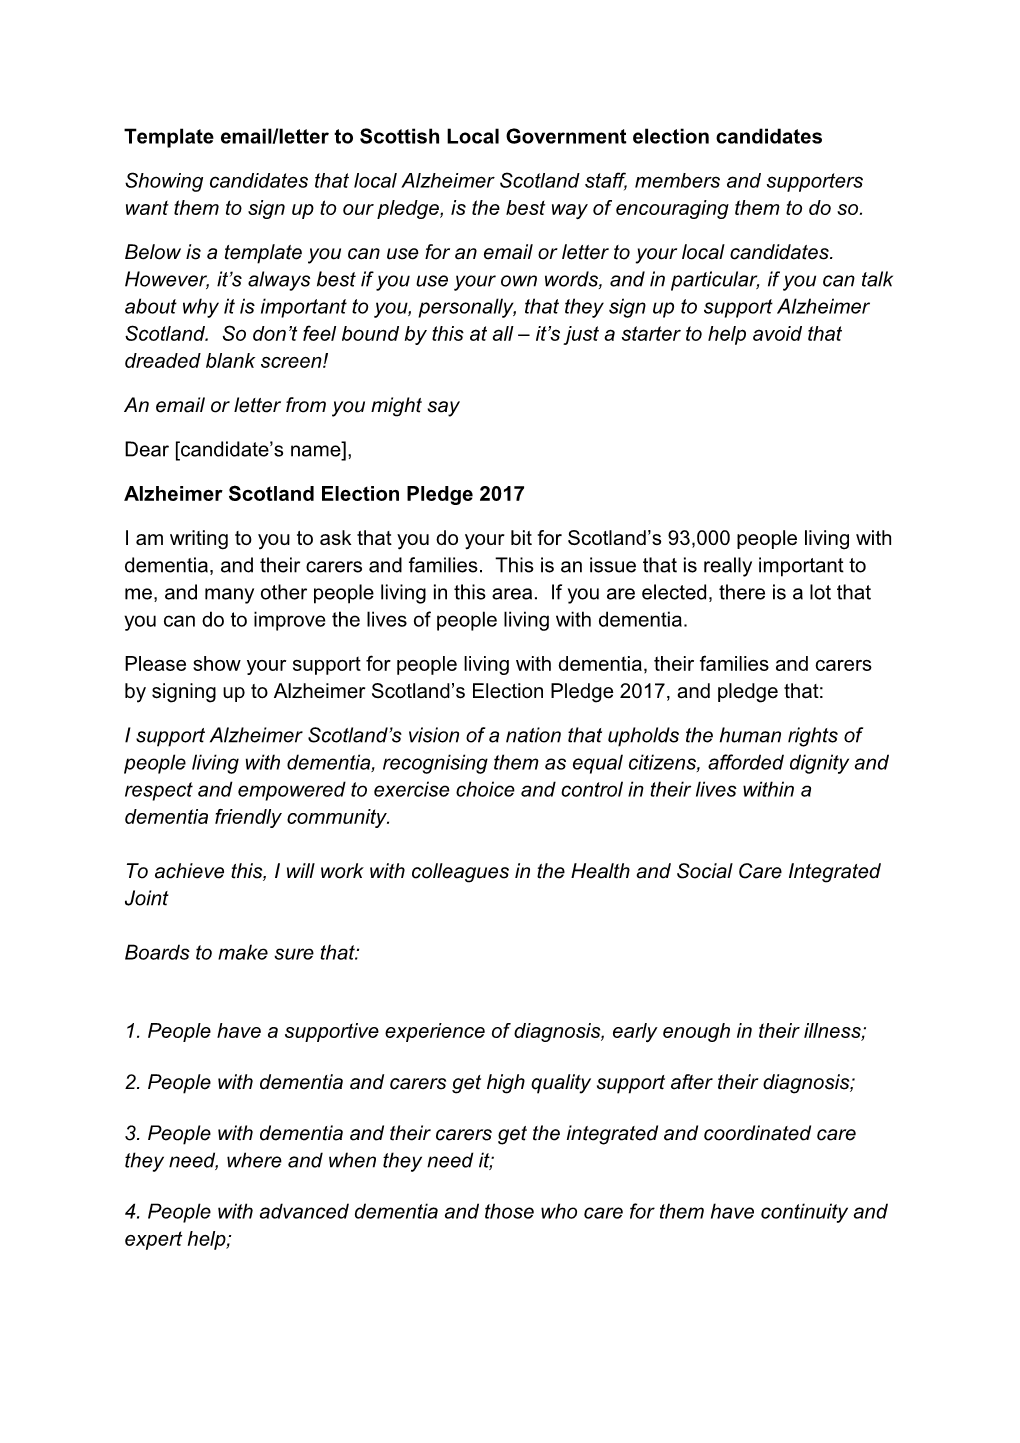 Template Email/Letter to Scottish Local Government Election Candidates